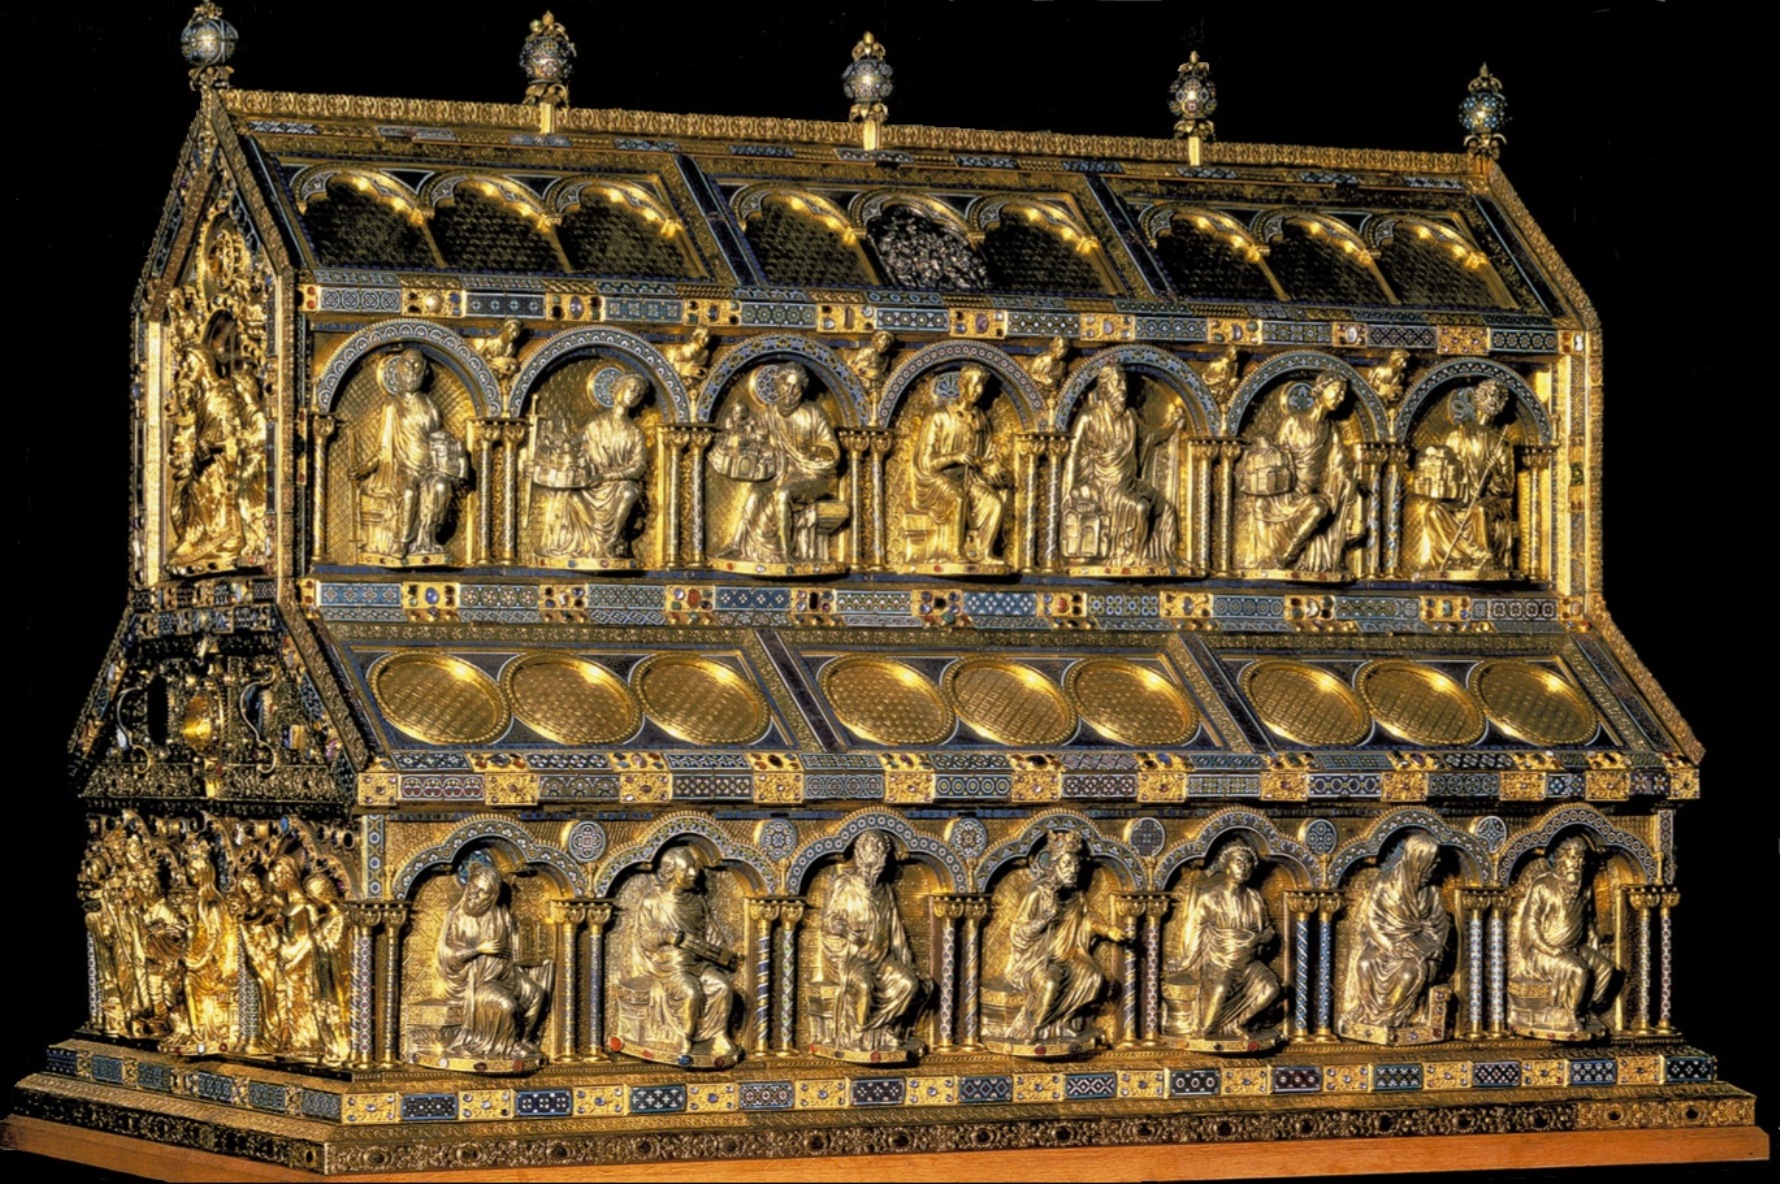 reliquary-of-the-wizard-kings-in-the-cathedral-of-cologne.jpg